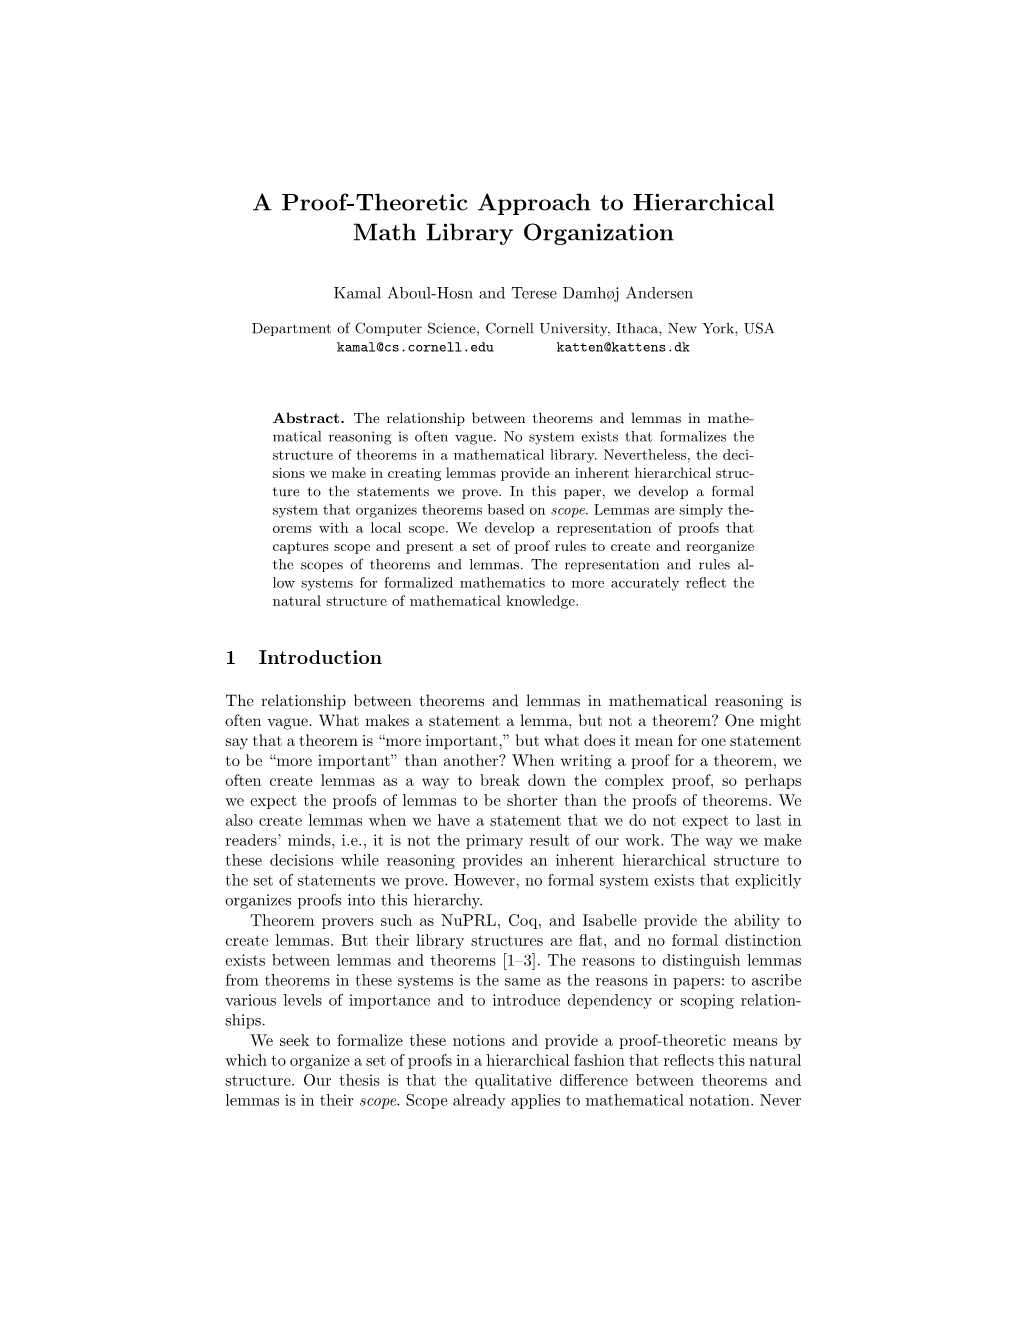 A Proof-Theoretic Approach to Hierarchical Math Library Organization